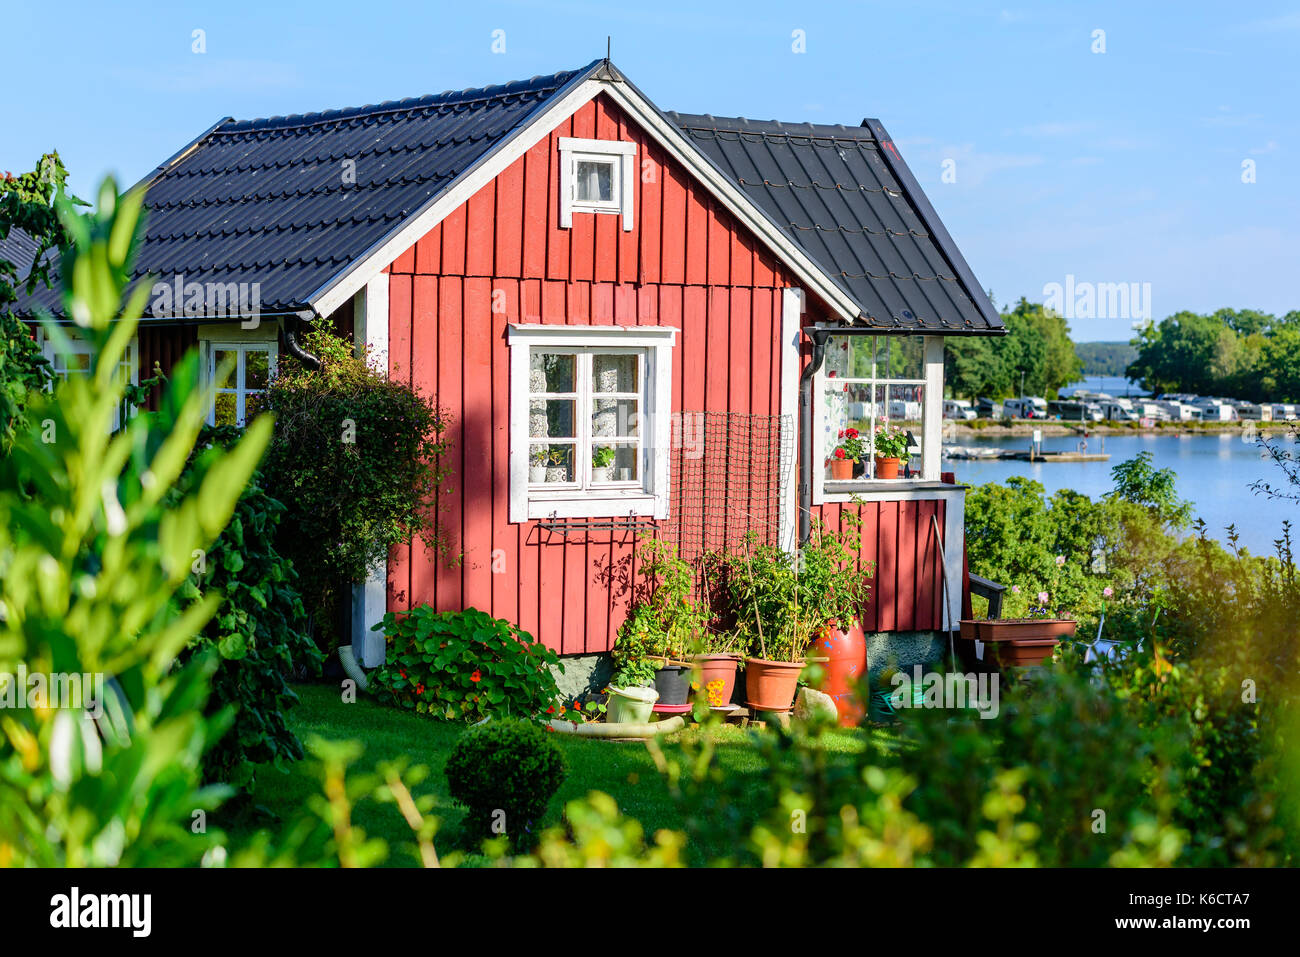 Karlskrona, Sweden - August 28, 2017: Travel documentary of city gardens. Red vintage coastal cabin with flowerpots in garden. Sea and camping area in Stock Photo